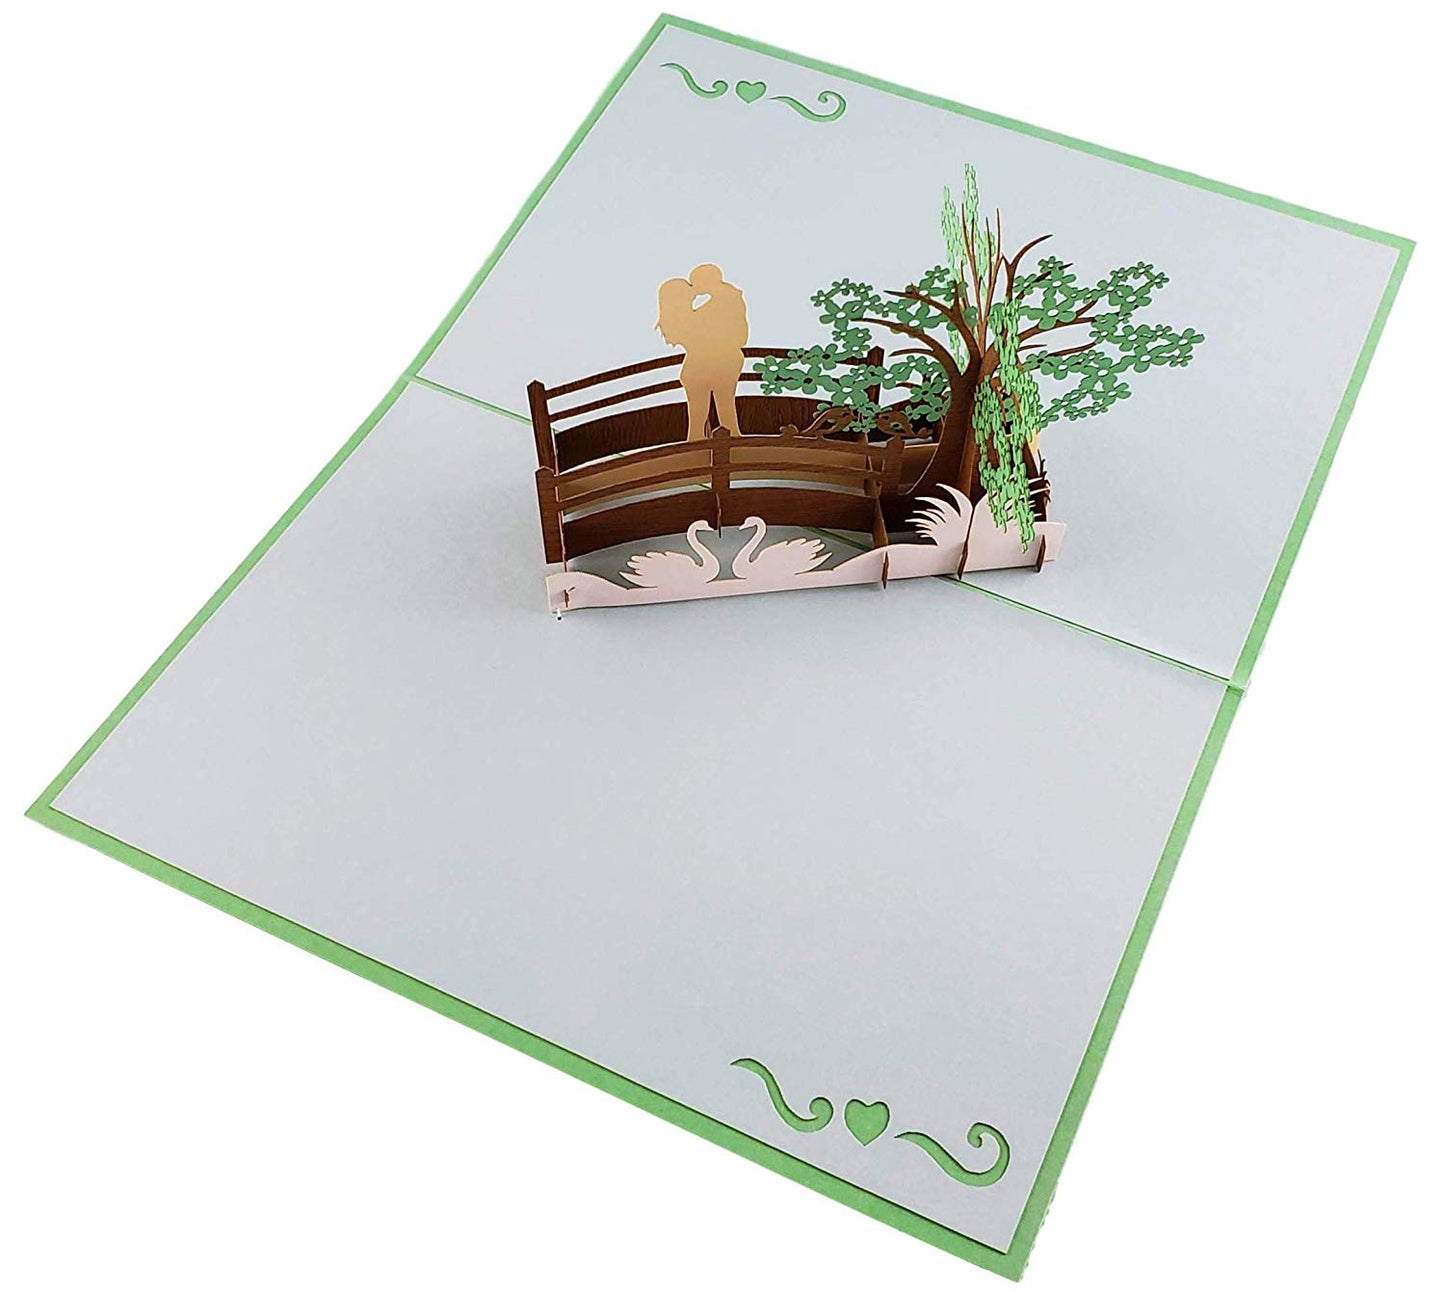 Happy 35th Anniversary 3D Pop Up Greeting Card - 35 Years Being Together - 35th Wedding Anniversary - iGifts And Cards